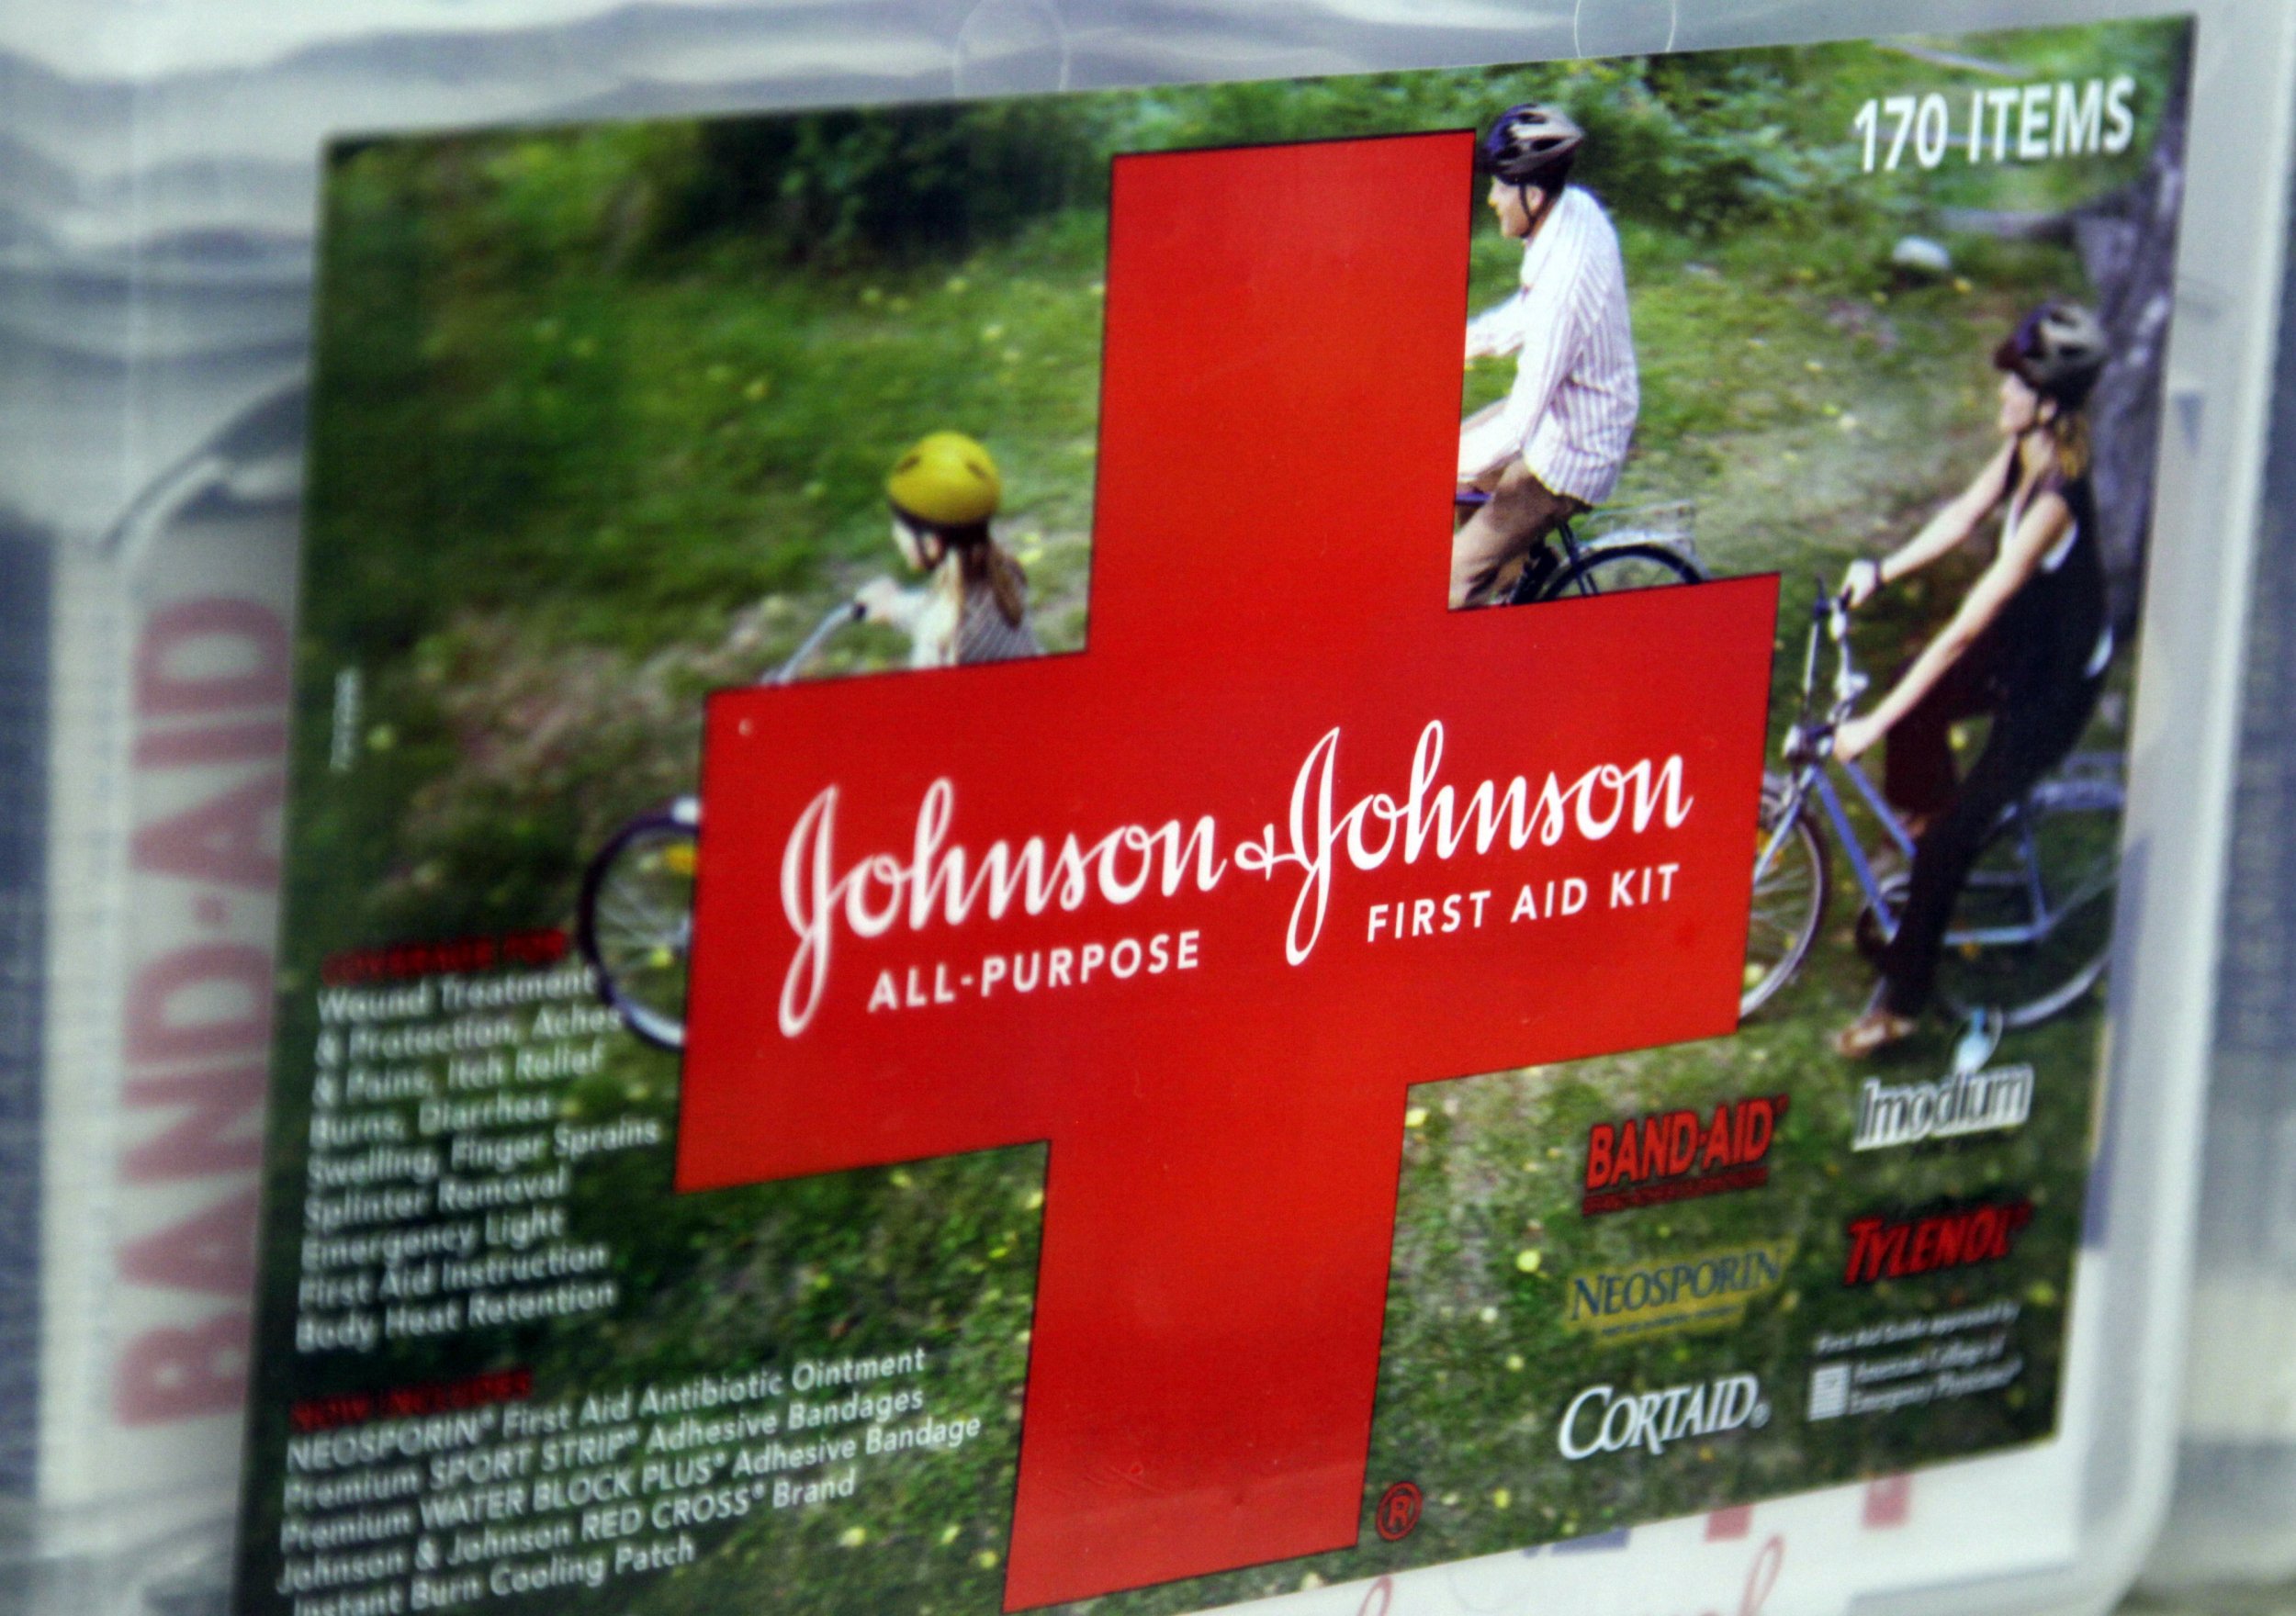 Johnson & Johnson And Its Subsidiaries Will Pay 2.2B Over Claims Of